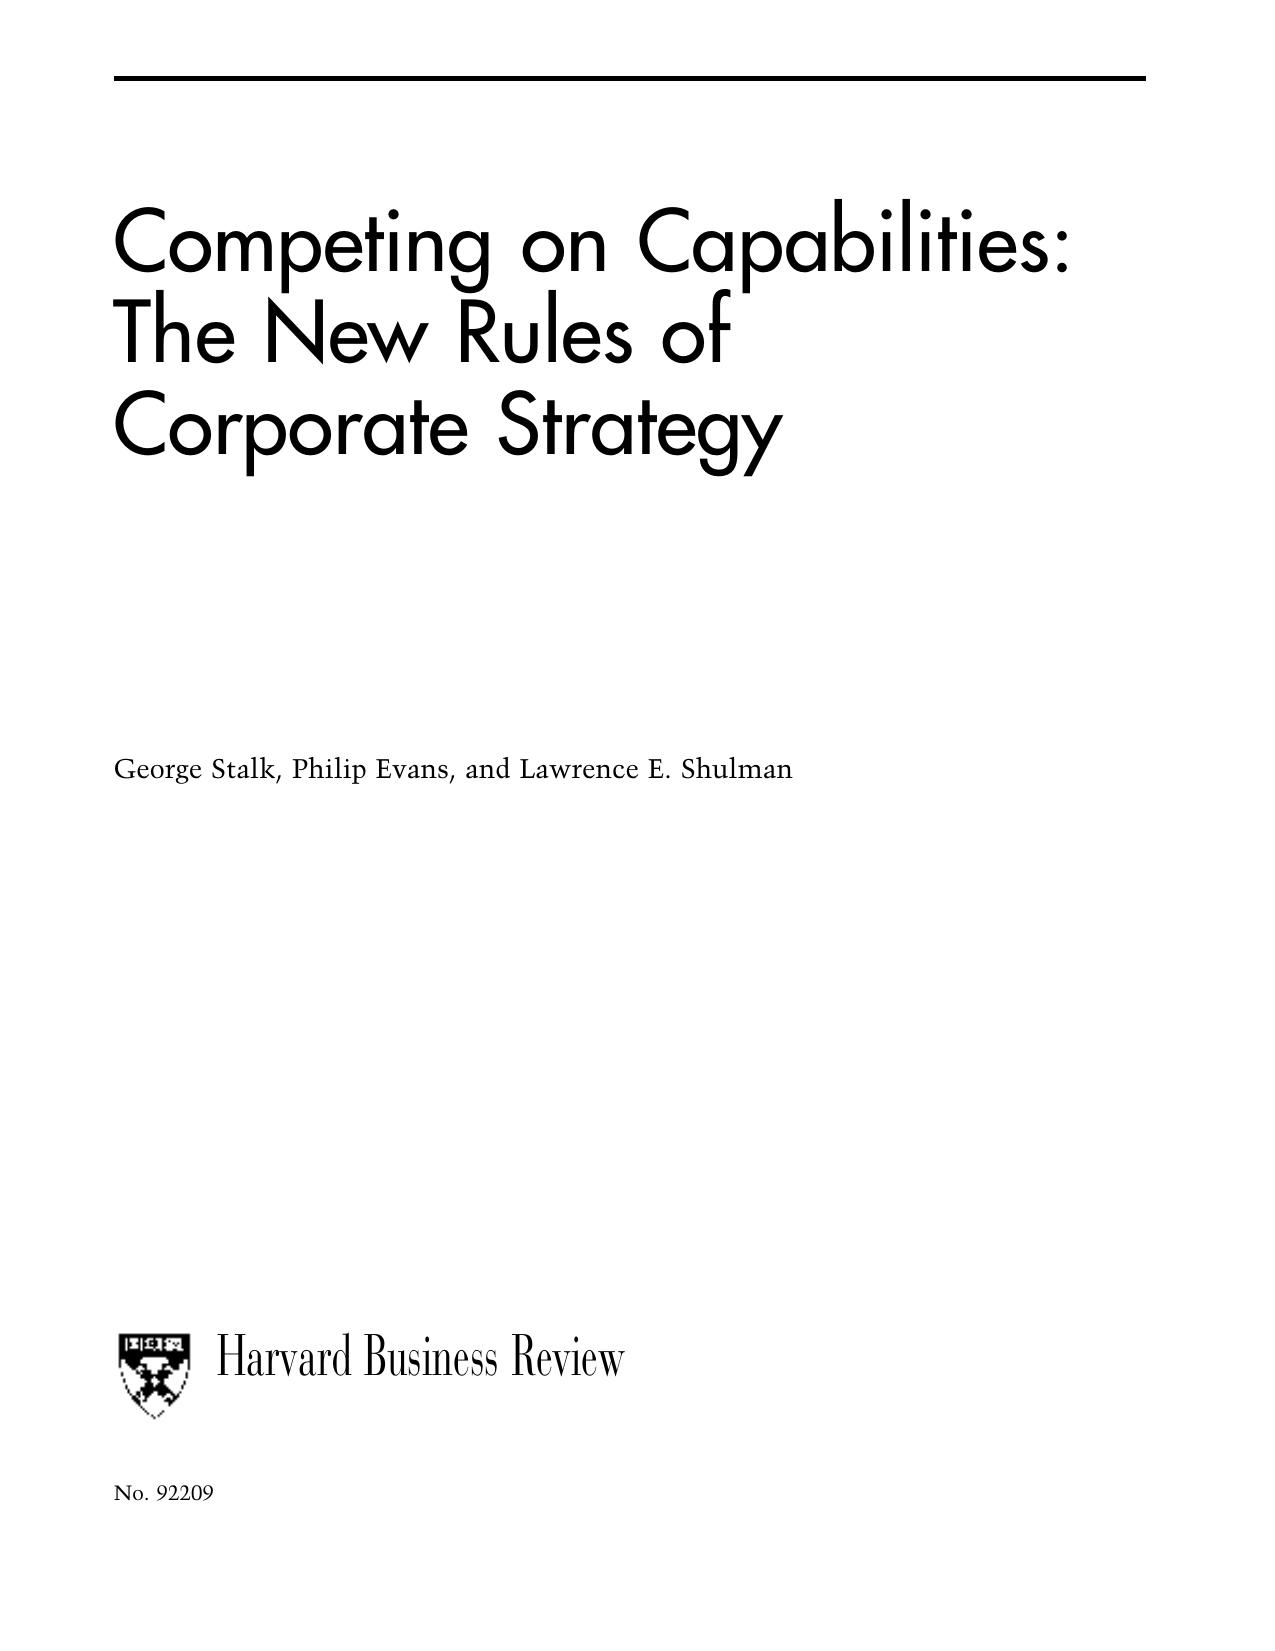 George, Jr. Stalk, Philip Evans, Lawrence E. Shulman Competing on Capabilities The New Rules of Corporate Strategy 1992